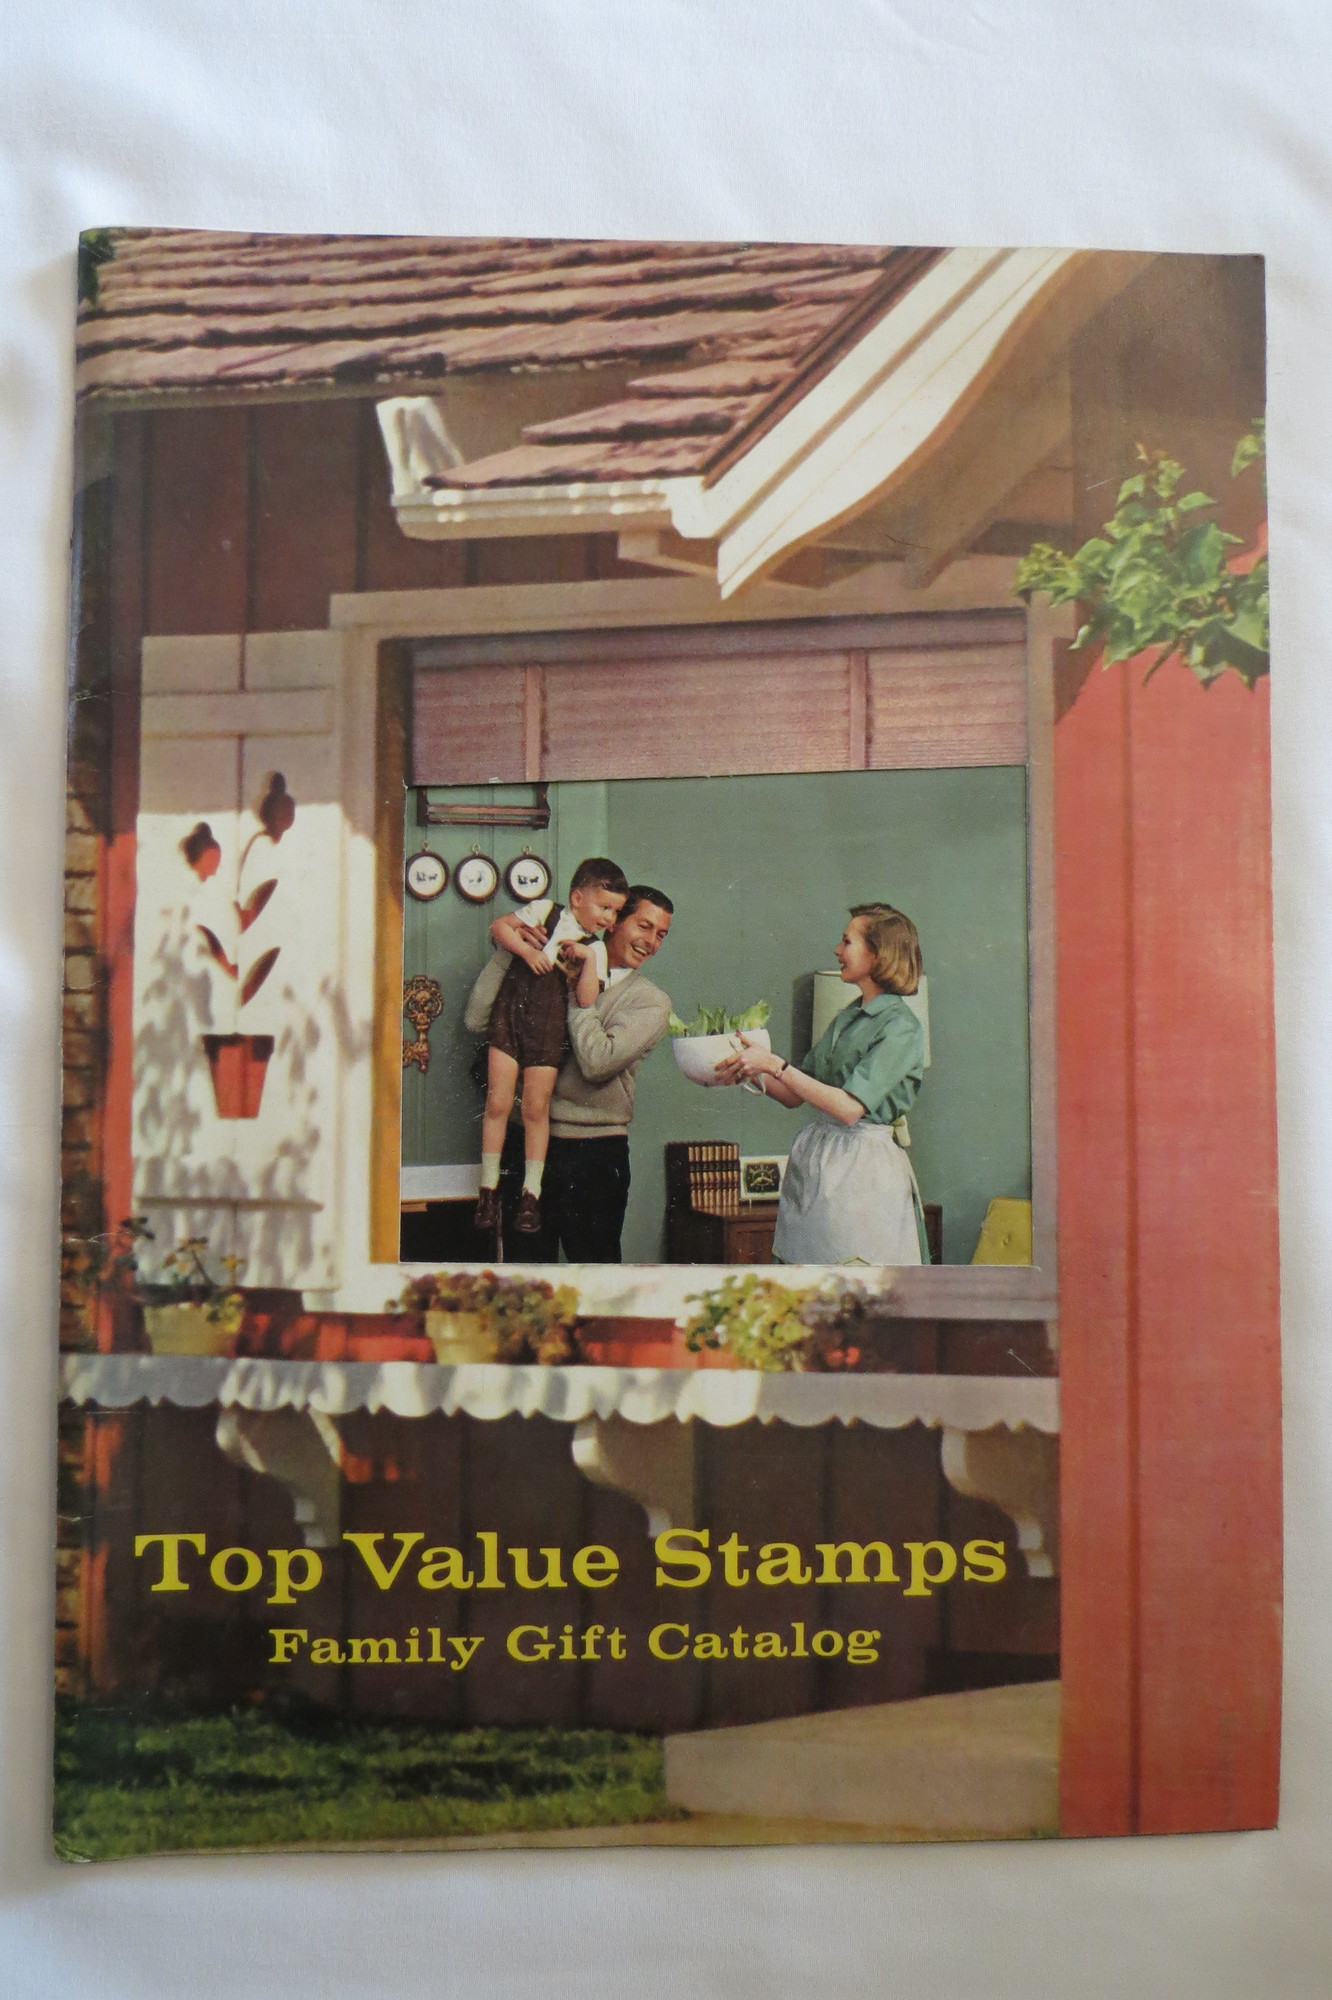 TOP VALUE STAMPS FAMILY GIFT CATALOG 1960S